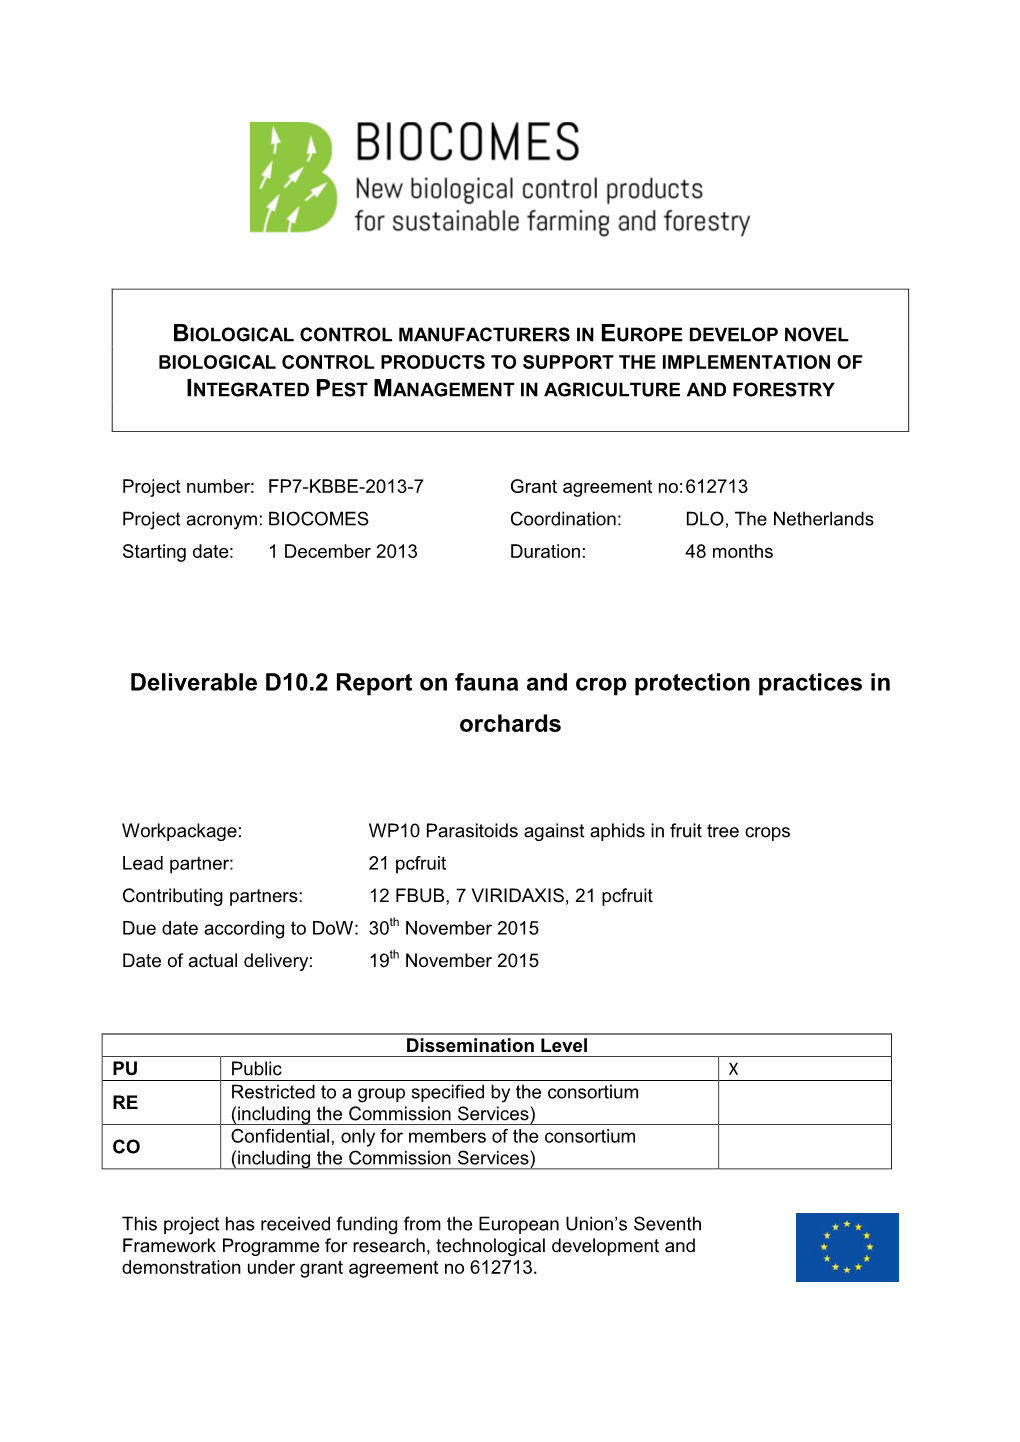 Deliverable D10.2 Report on Fauna and Crop Protection Practices in Orchards